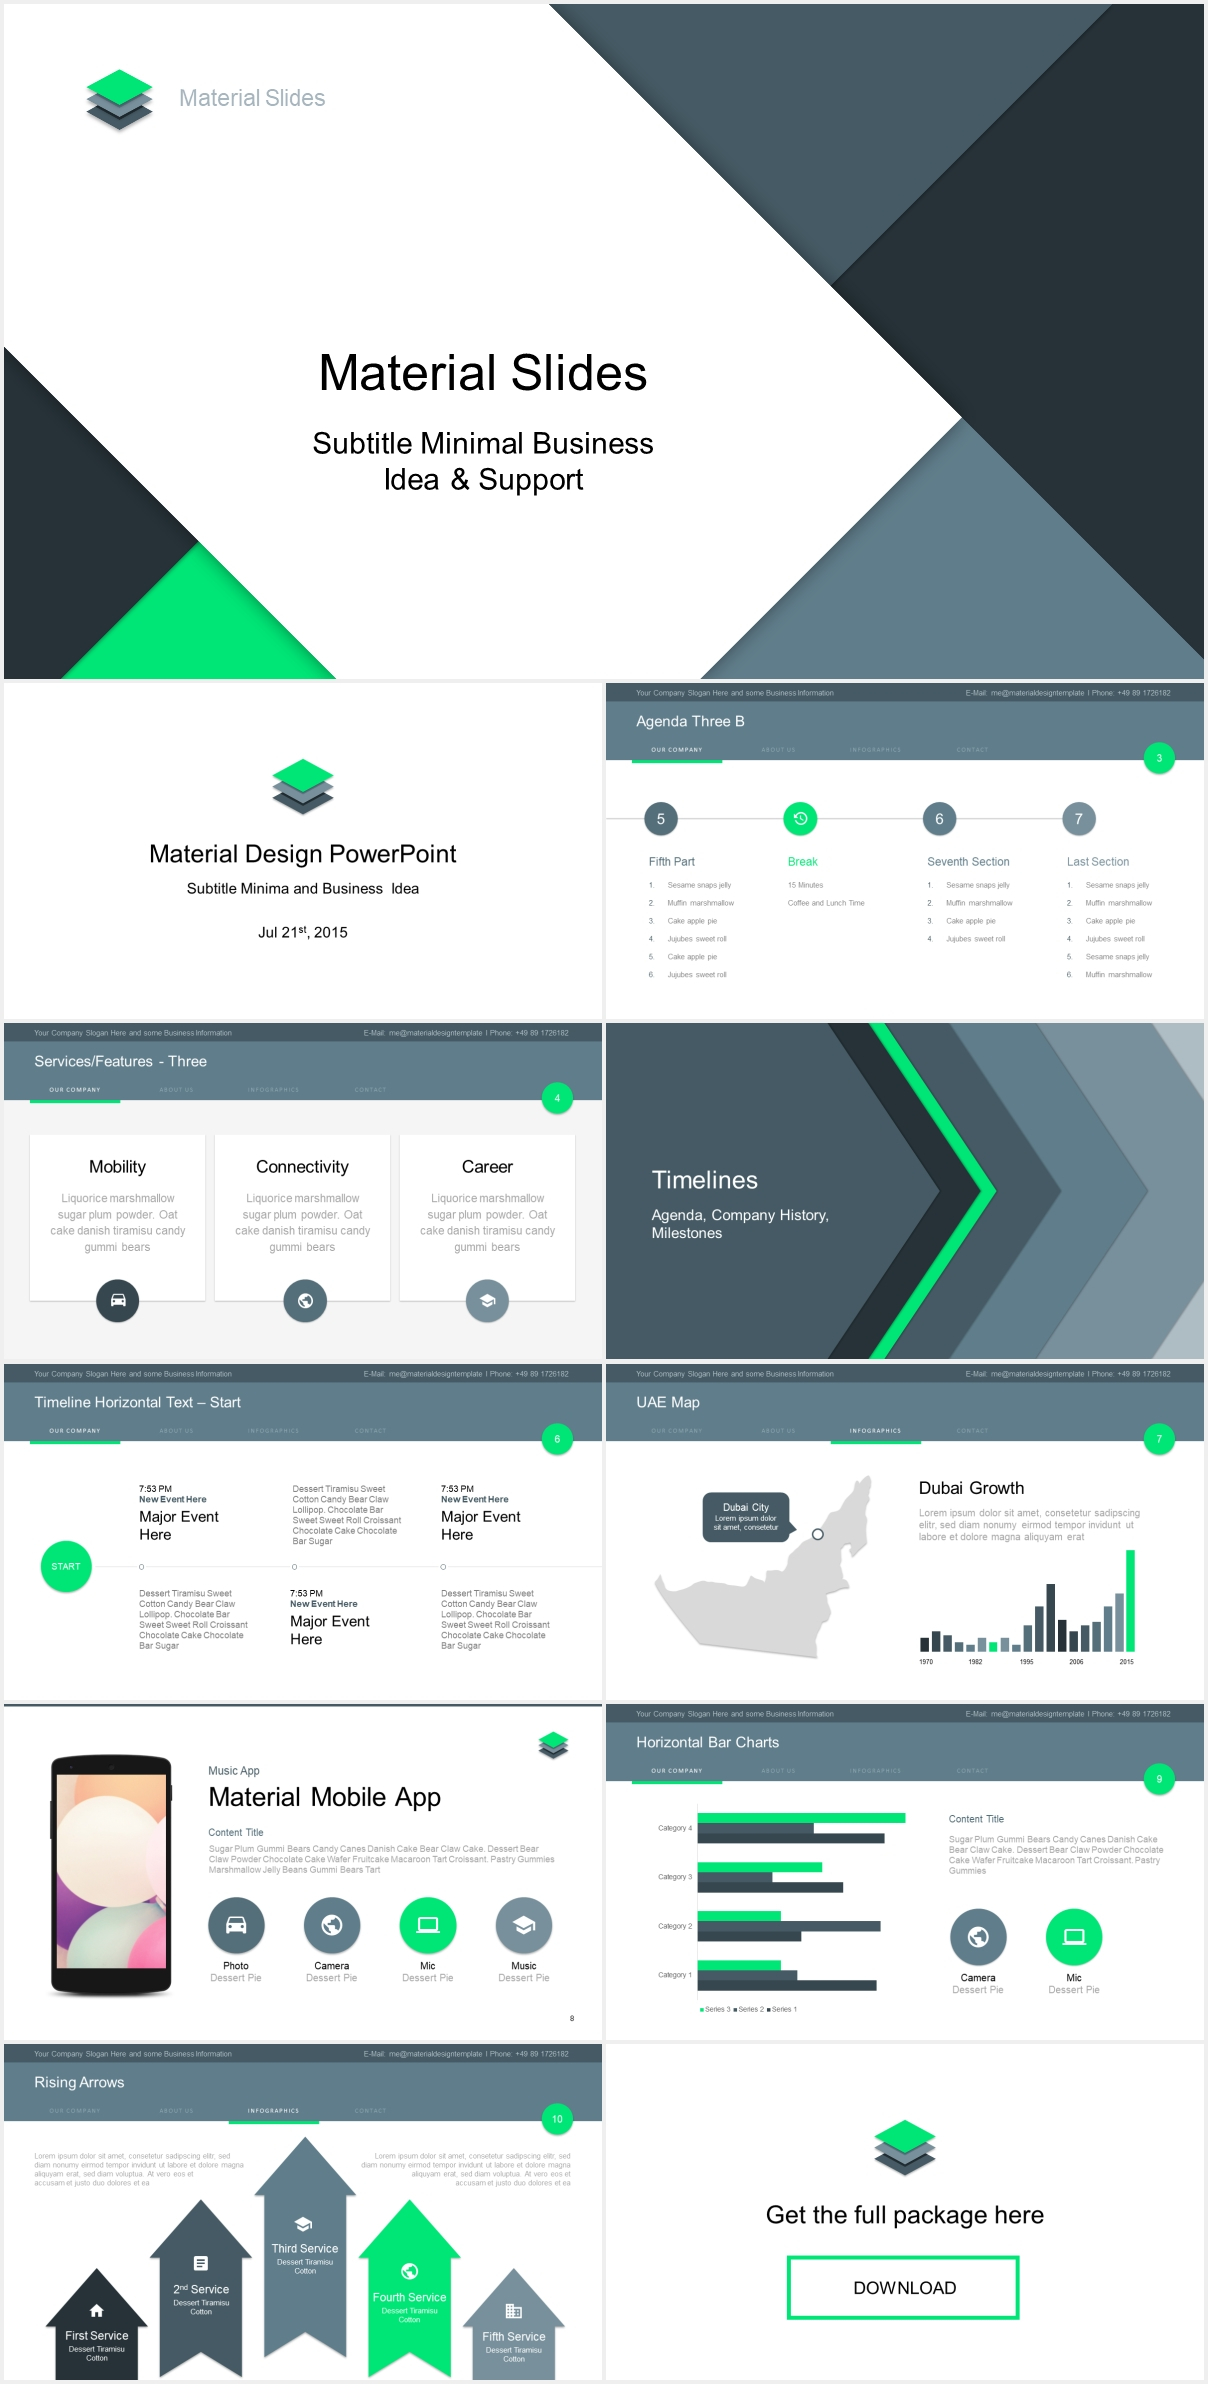 Material Design Powerpoint Template – Just Free Slides Pertaining To Powerpoint Slides Design Templates For Free